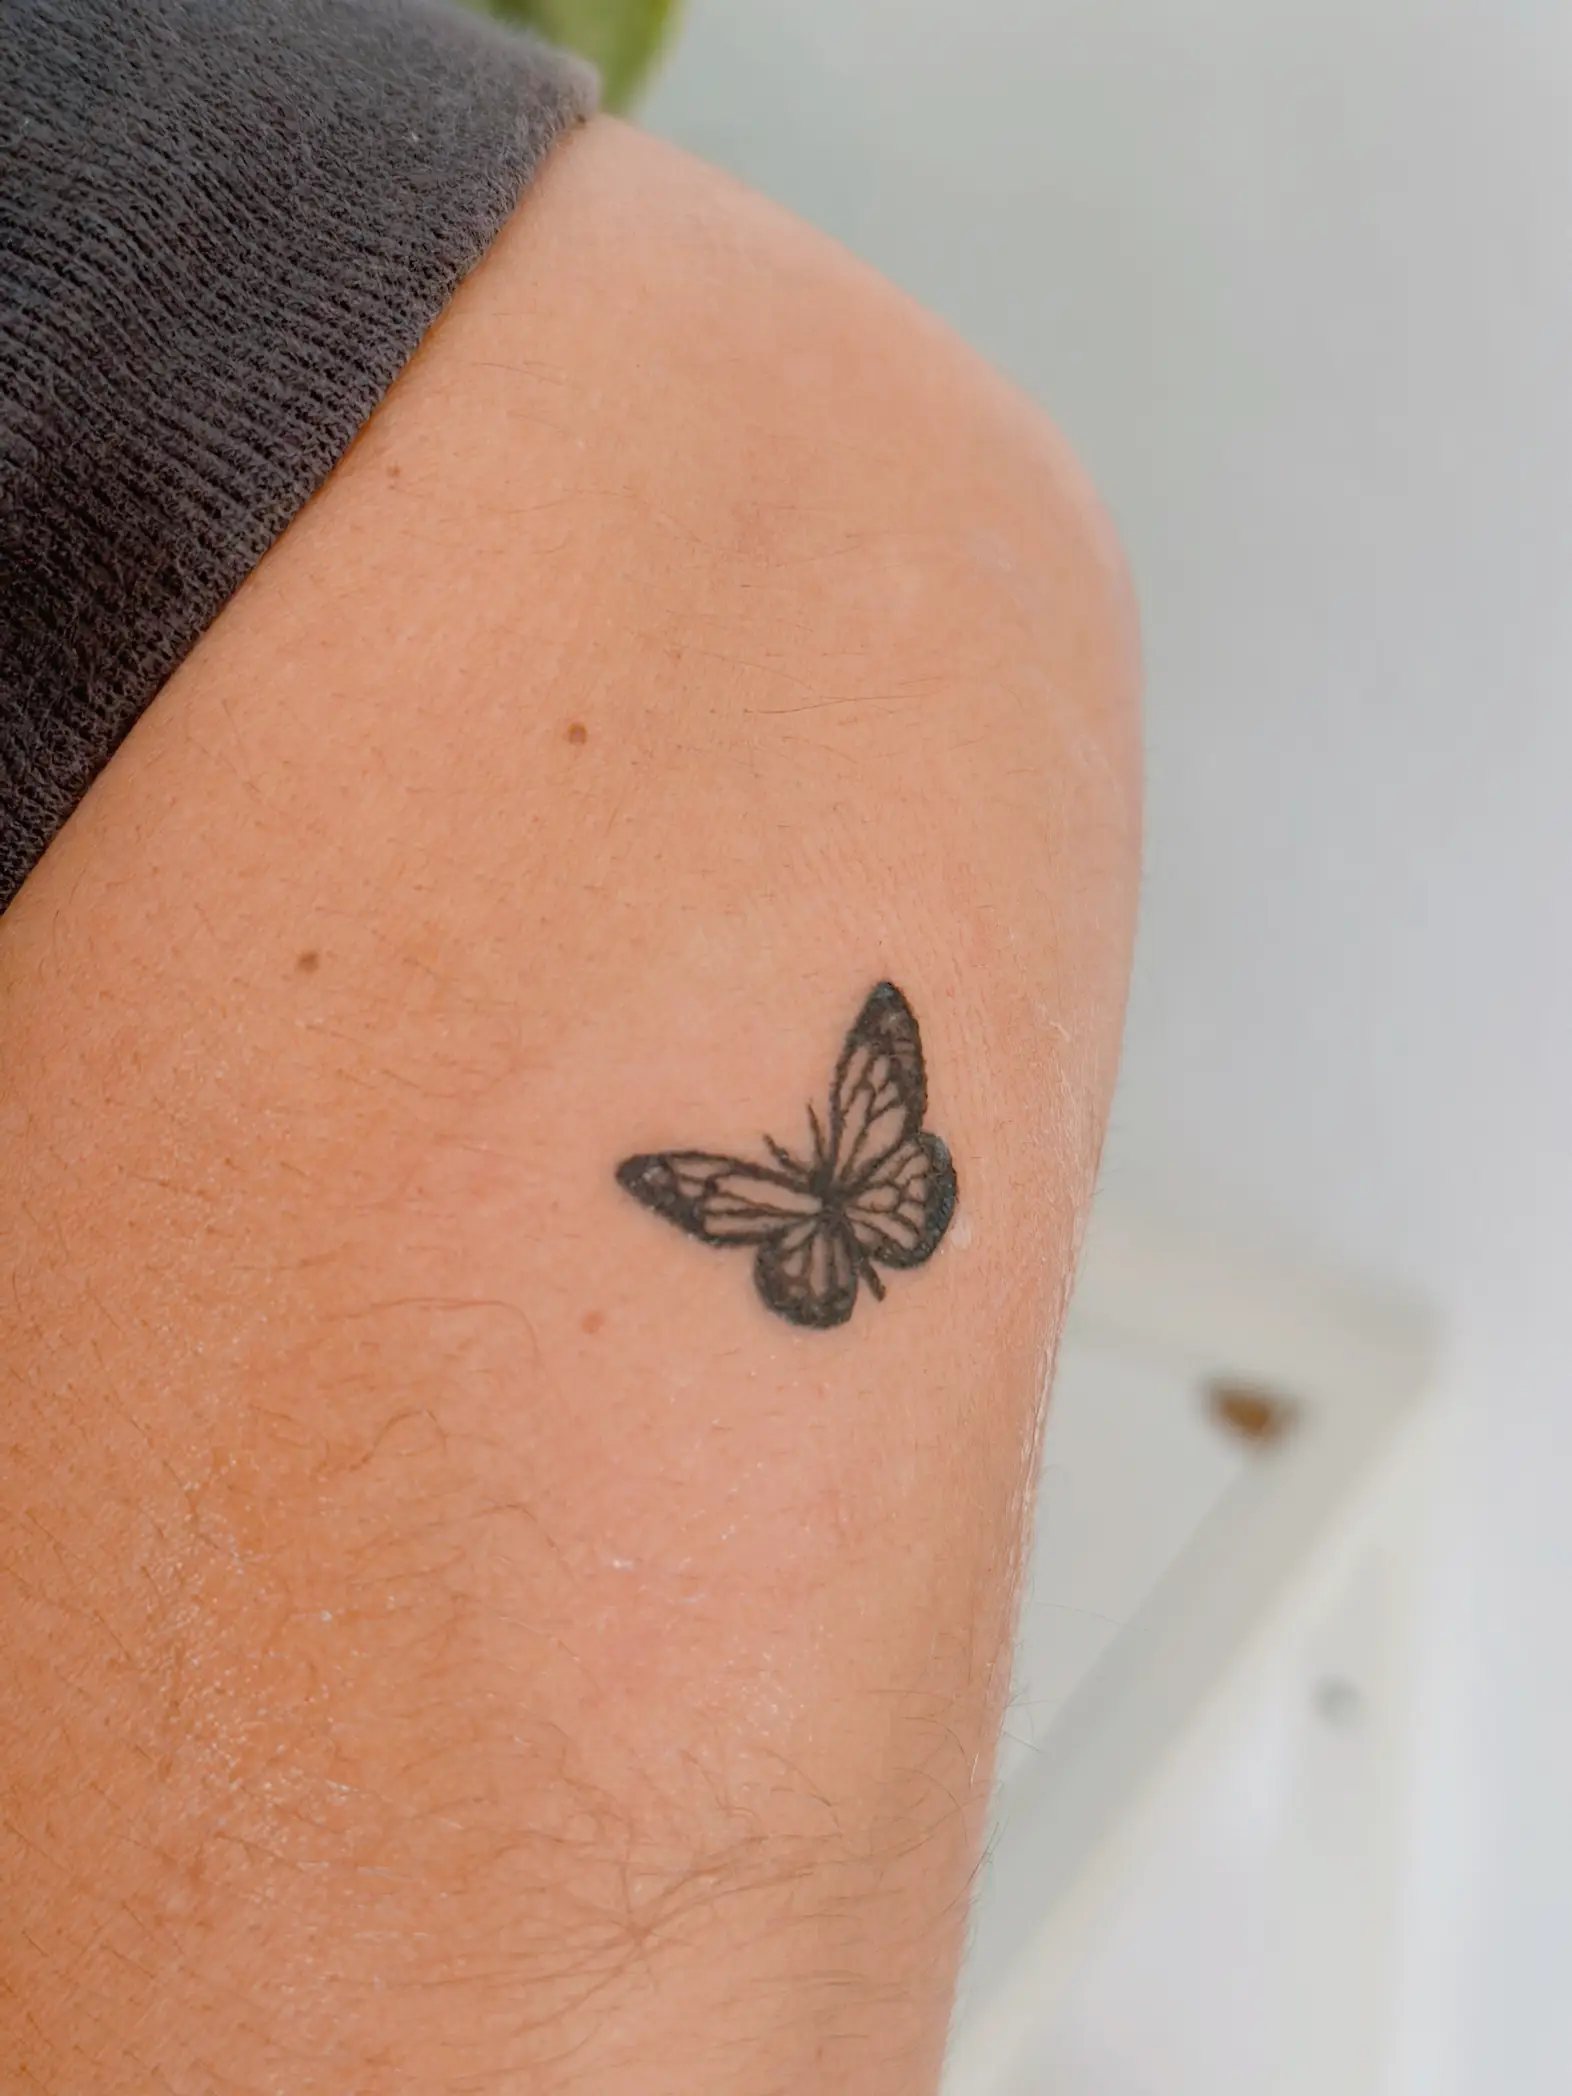 simple black butterfly tattoo